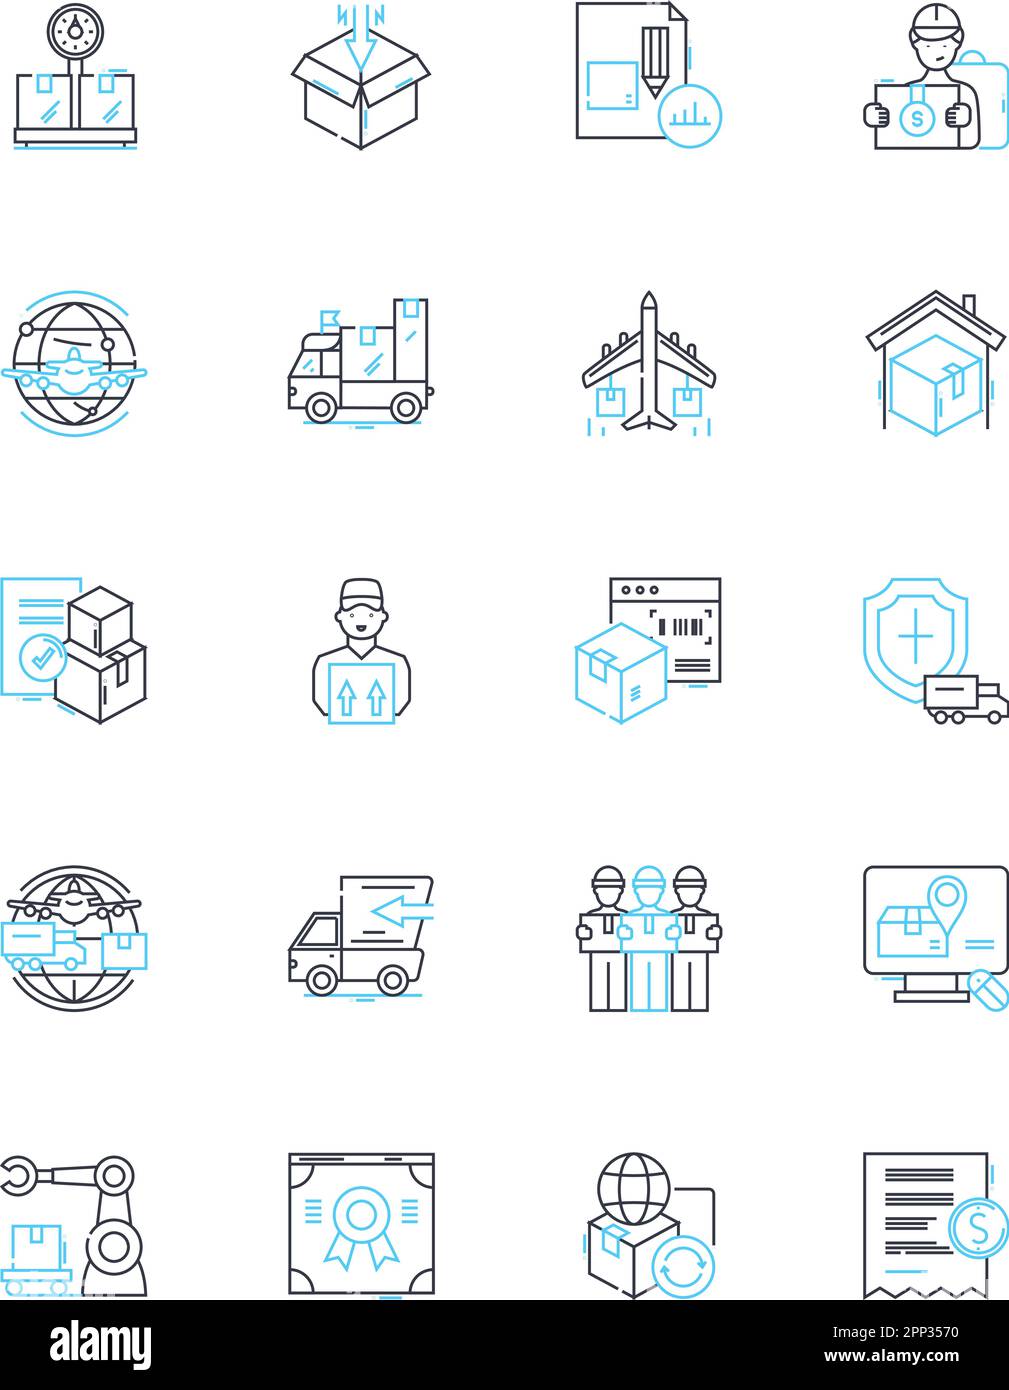 Transport logistics linear icons set. Freight, Trucking, Distribution, Shipping, Haulage, Supply chain, Warehousing line vector and concept signs Stock Vector